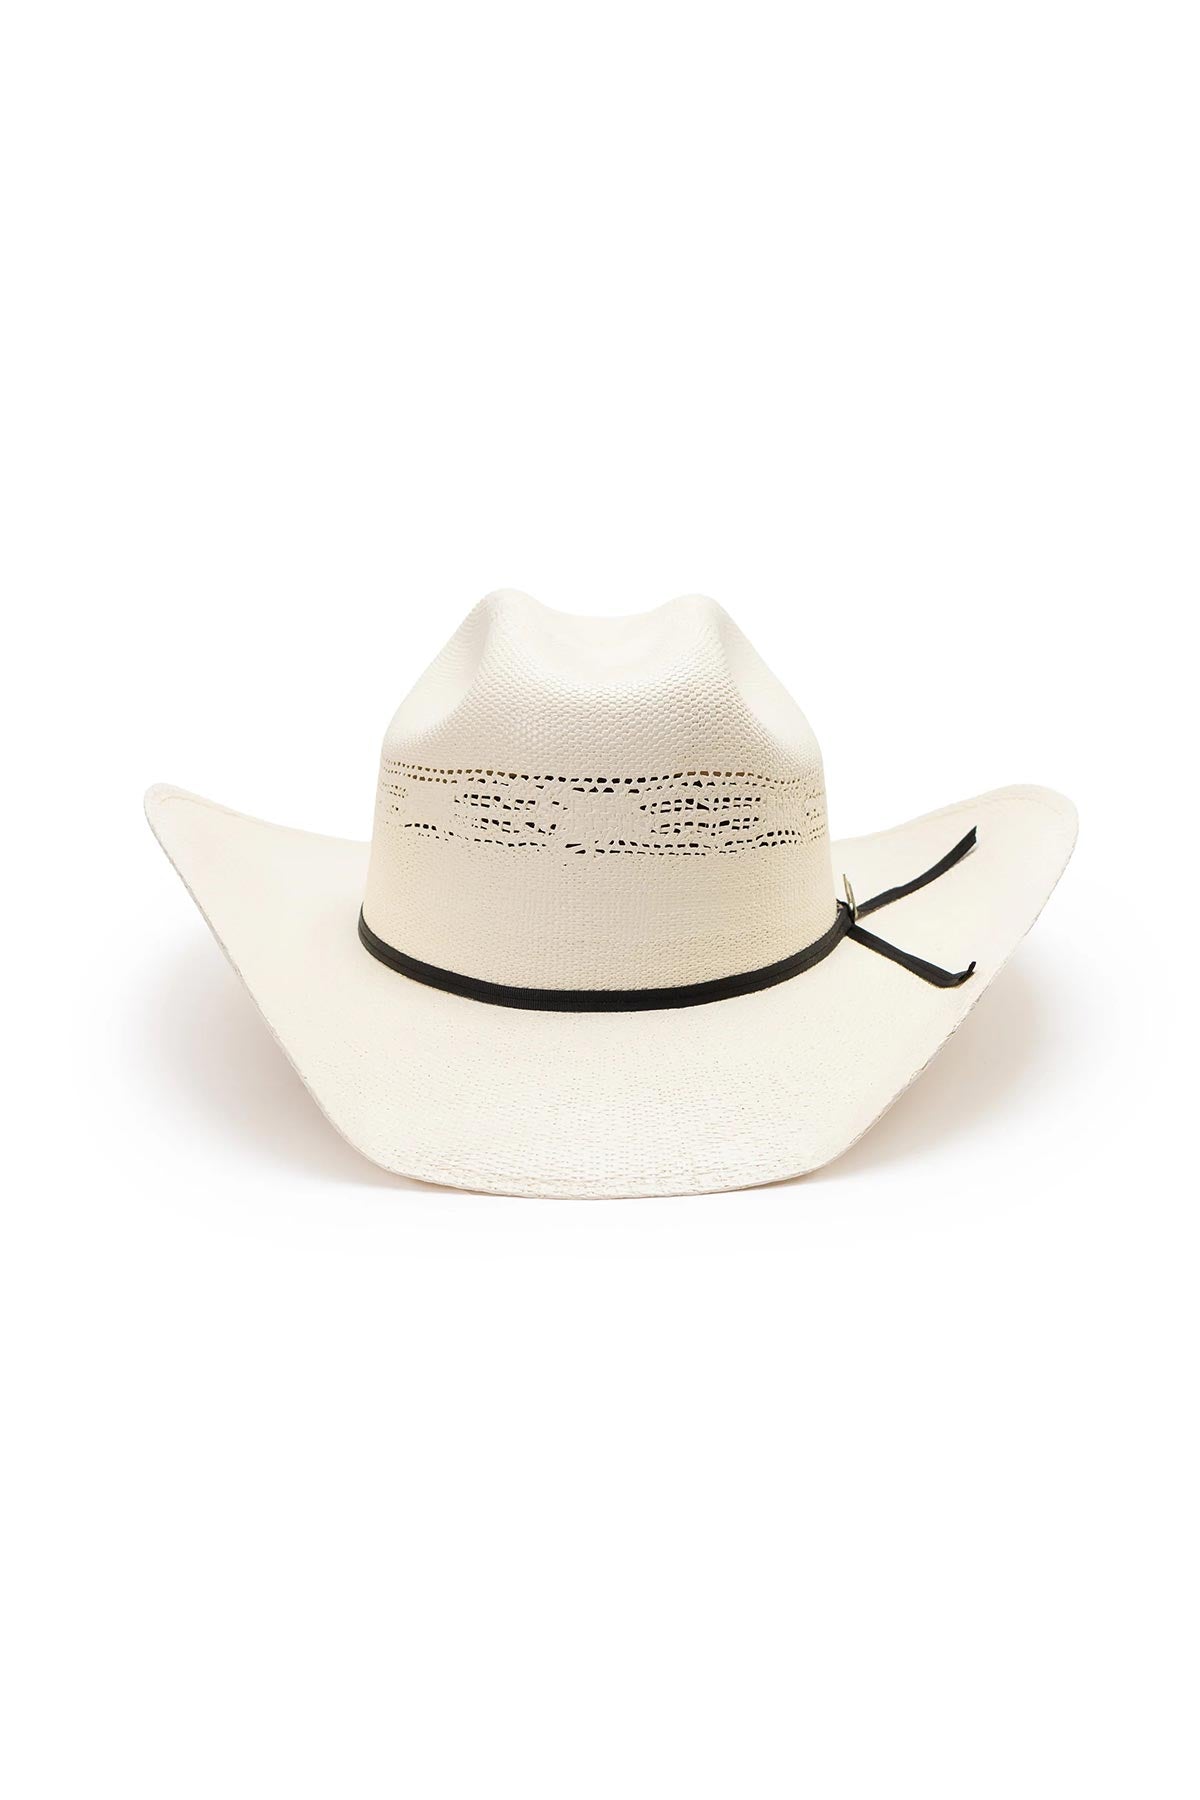 Seager - Longhorn Straw Hat - Ivory - Front